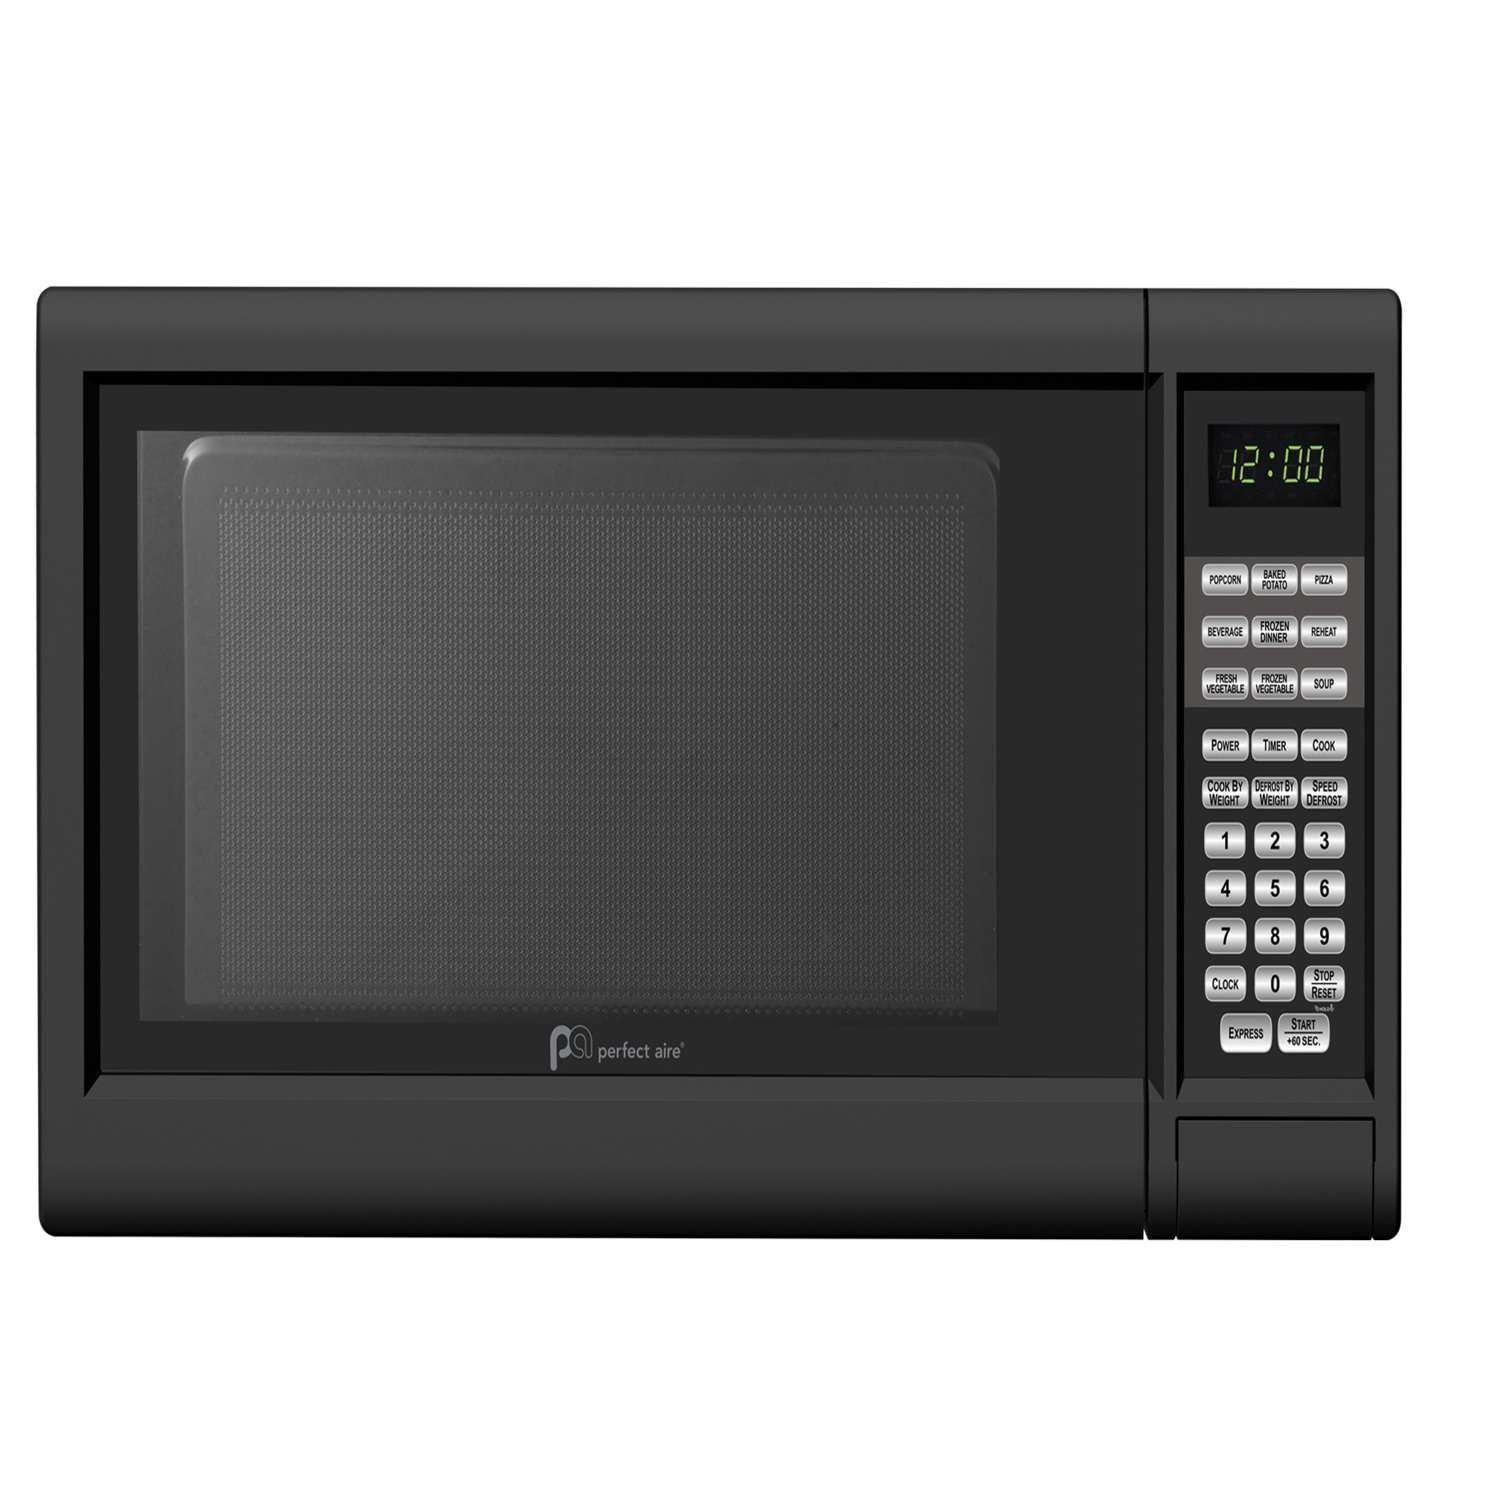 Perfect Aire 1.3 ft³ Black Microwave 1000 W - Ace Hardware